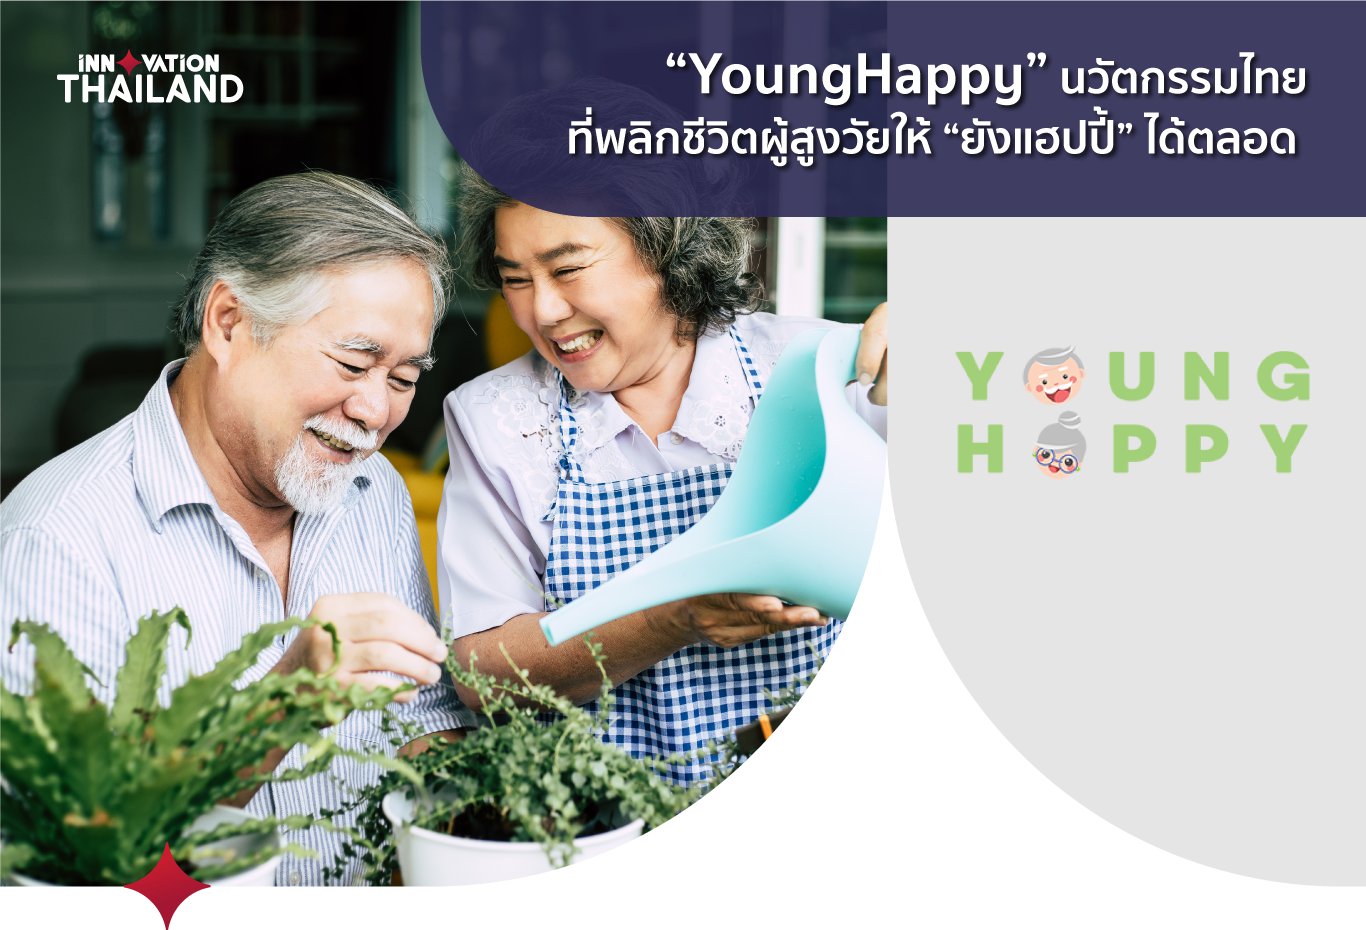 YoungHappy Thai Innovation That Helps The Elderly Stays Young and Happy Always